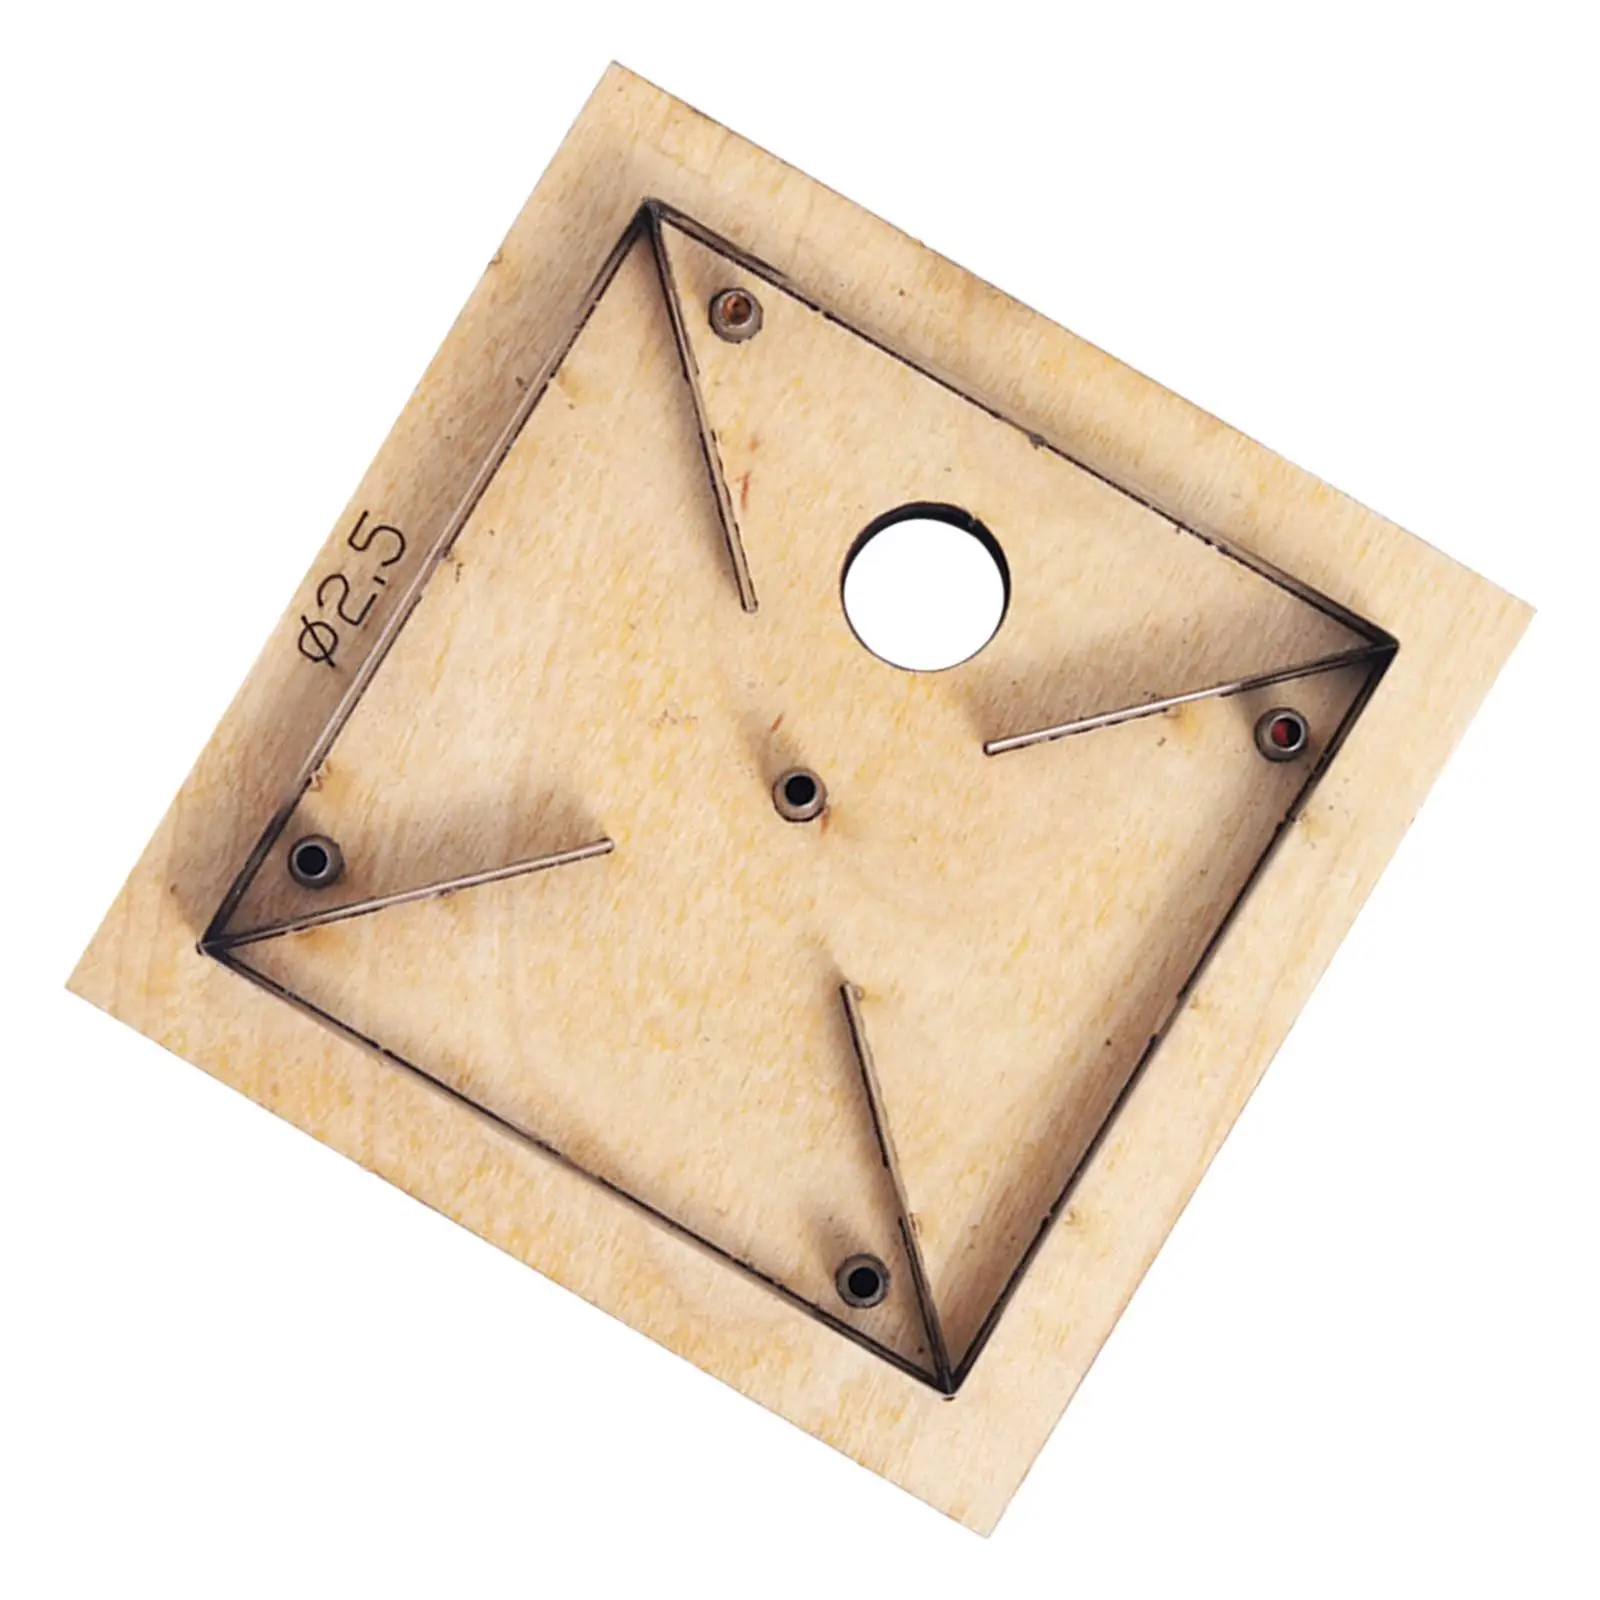 Wooden Leather Cutting Dies Pendant Templates Leather Craft Leather Template